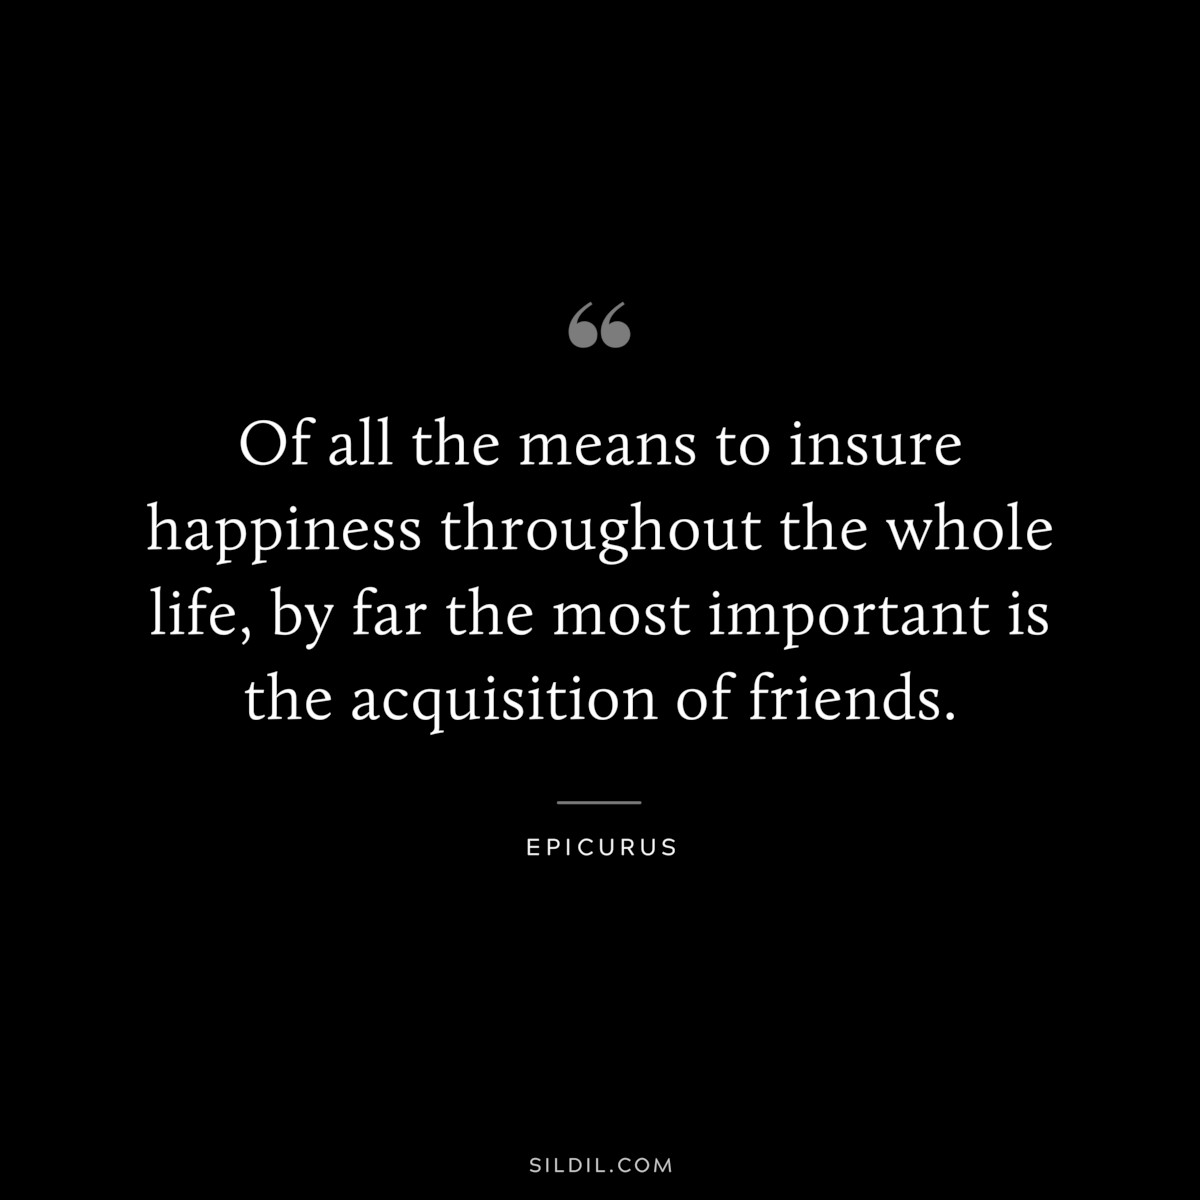 Of all the means to insure happiness throughout the whole life, by far the most important is the acquisition of friends. — Epicurus